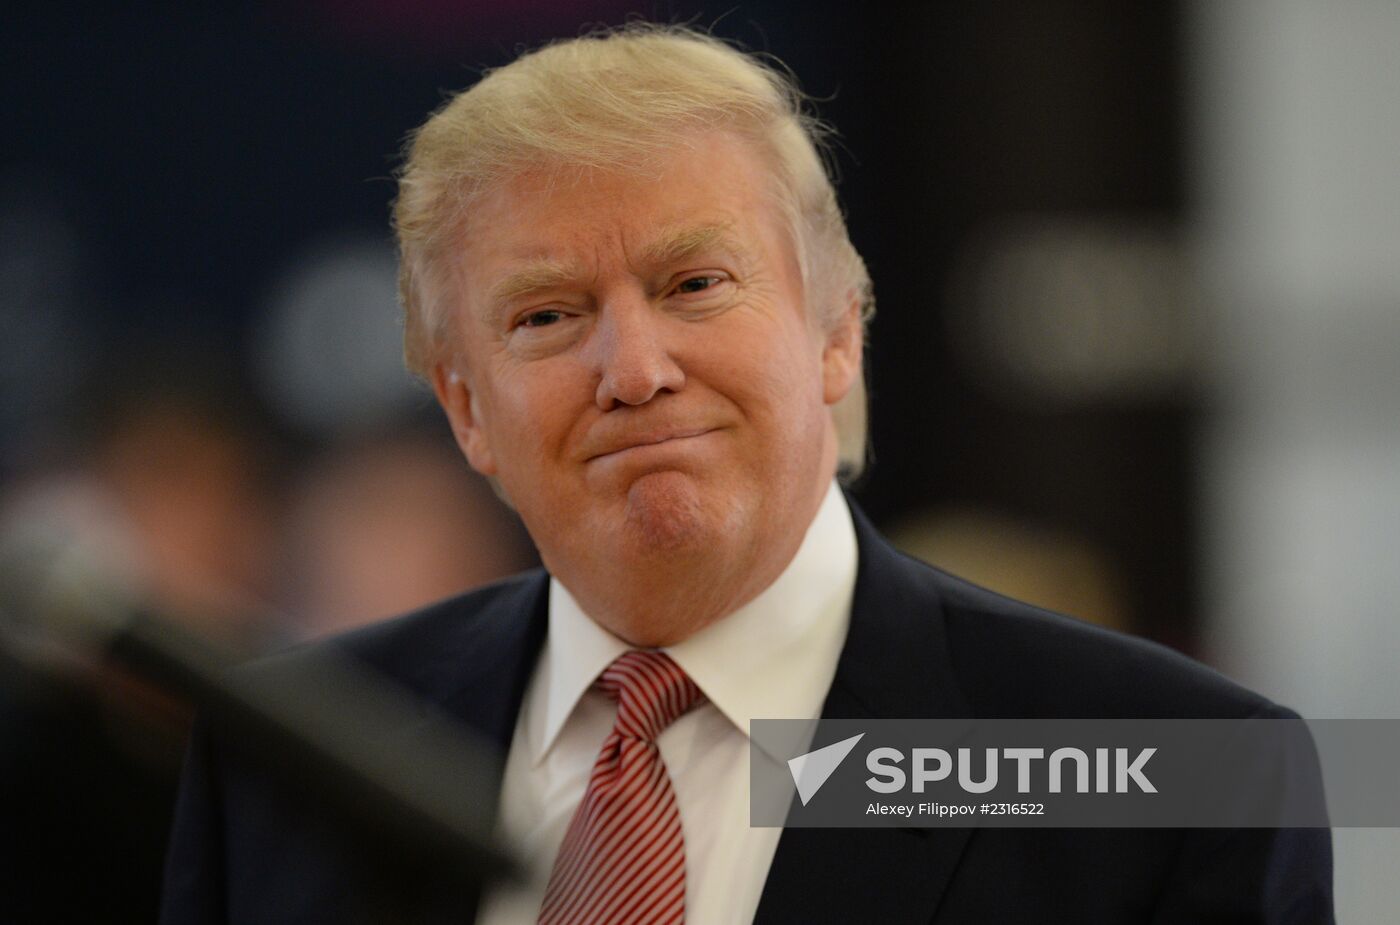 News conference with Donald Trump on 2013 Miss Universe Competition